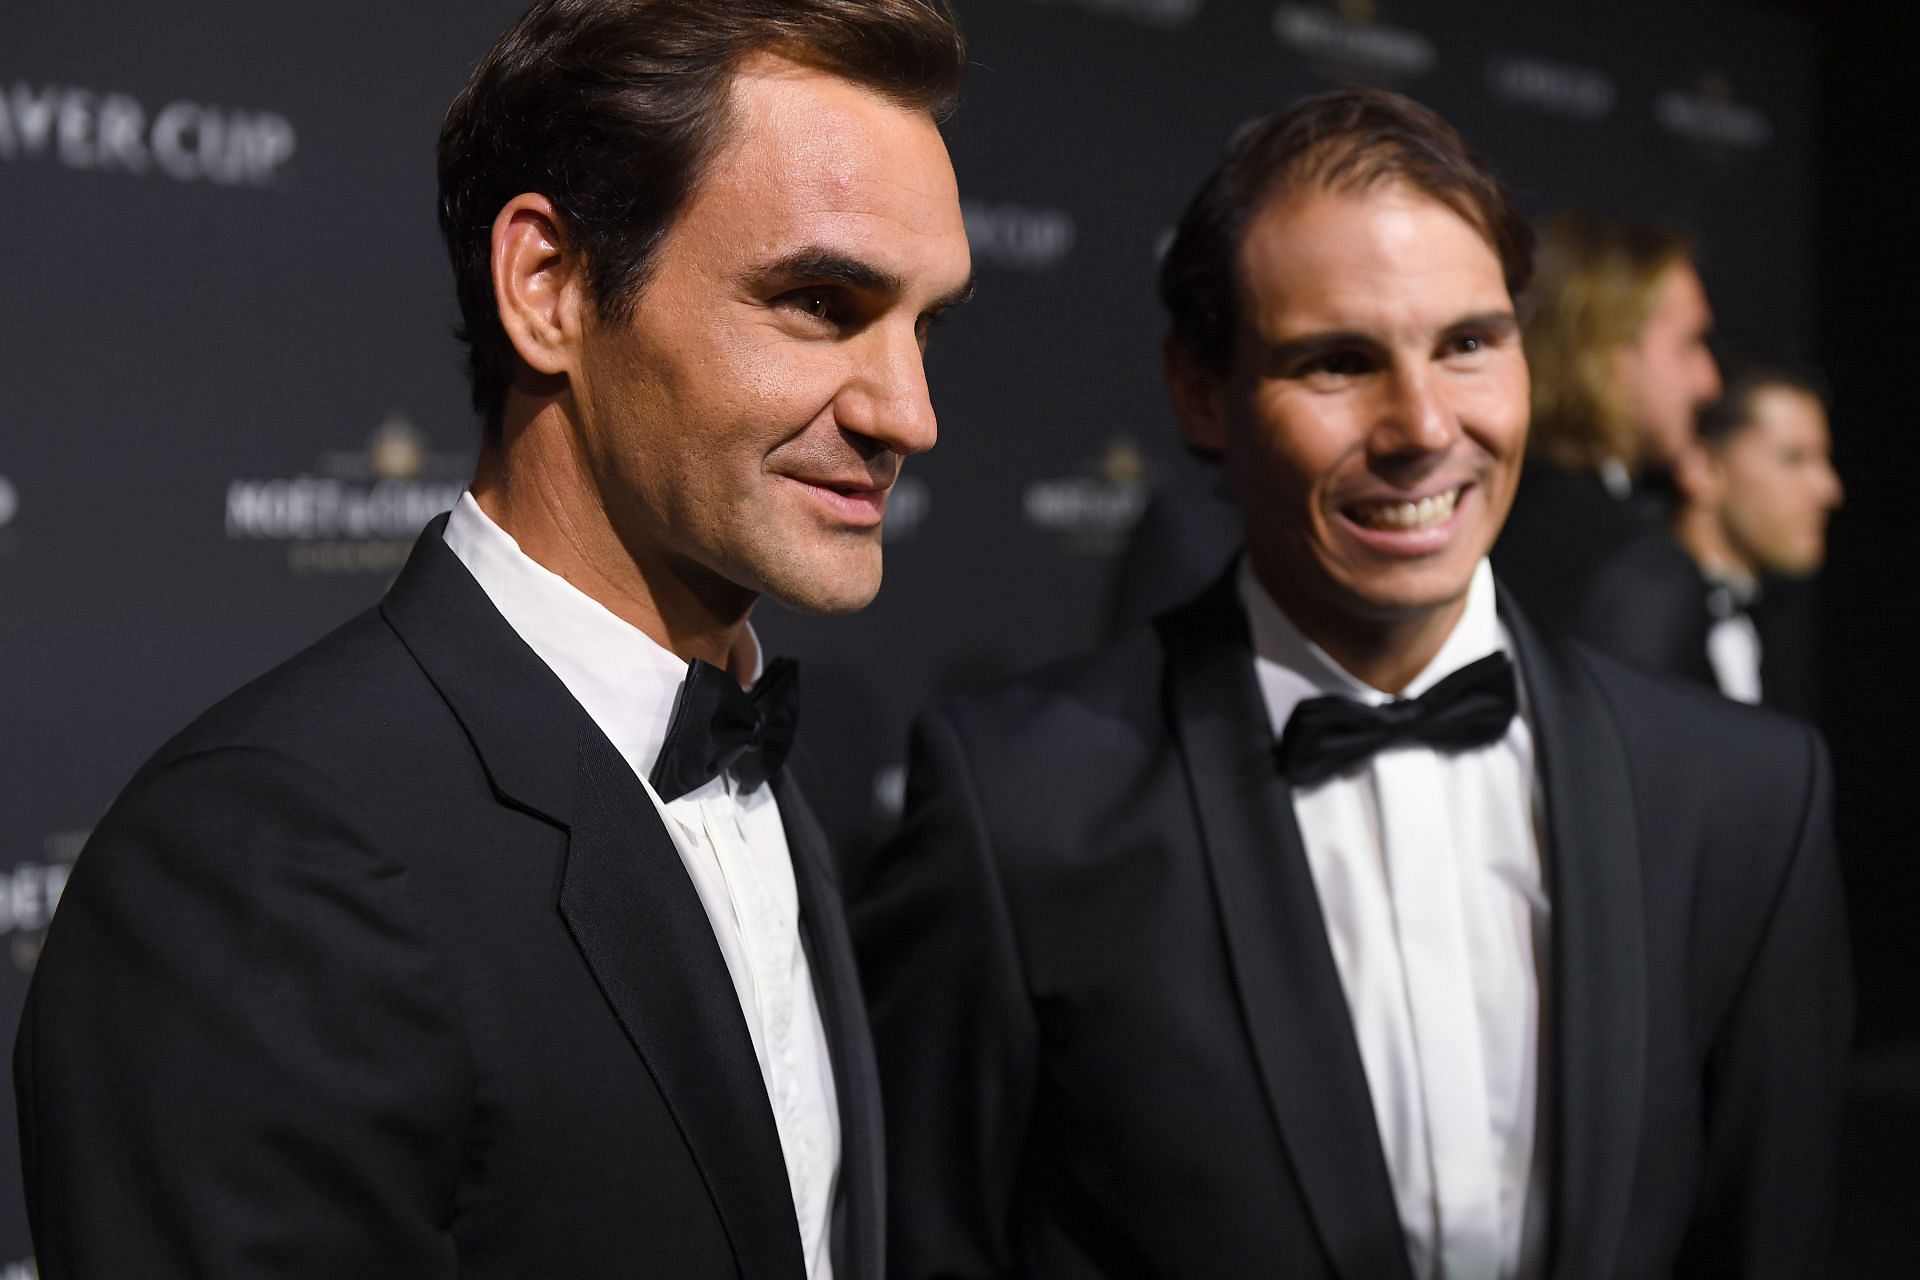 A ceremony at the Laver Cup 2019 Brief